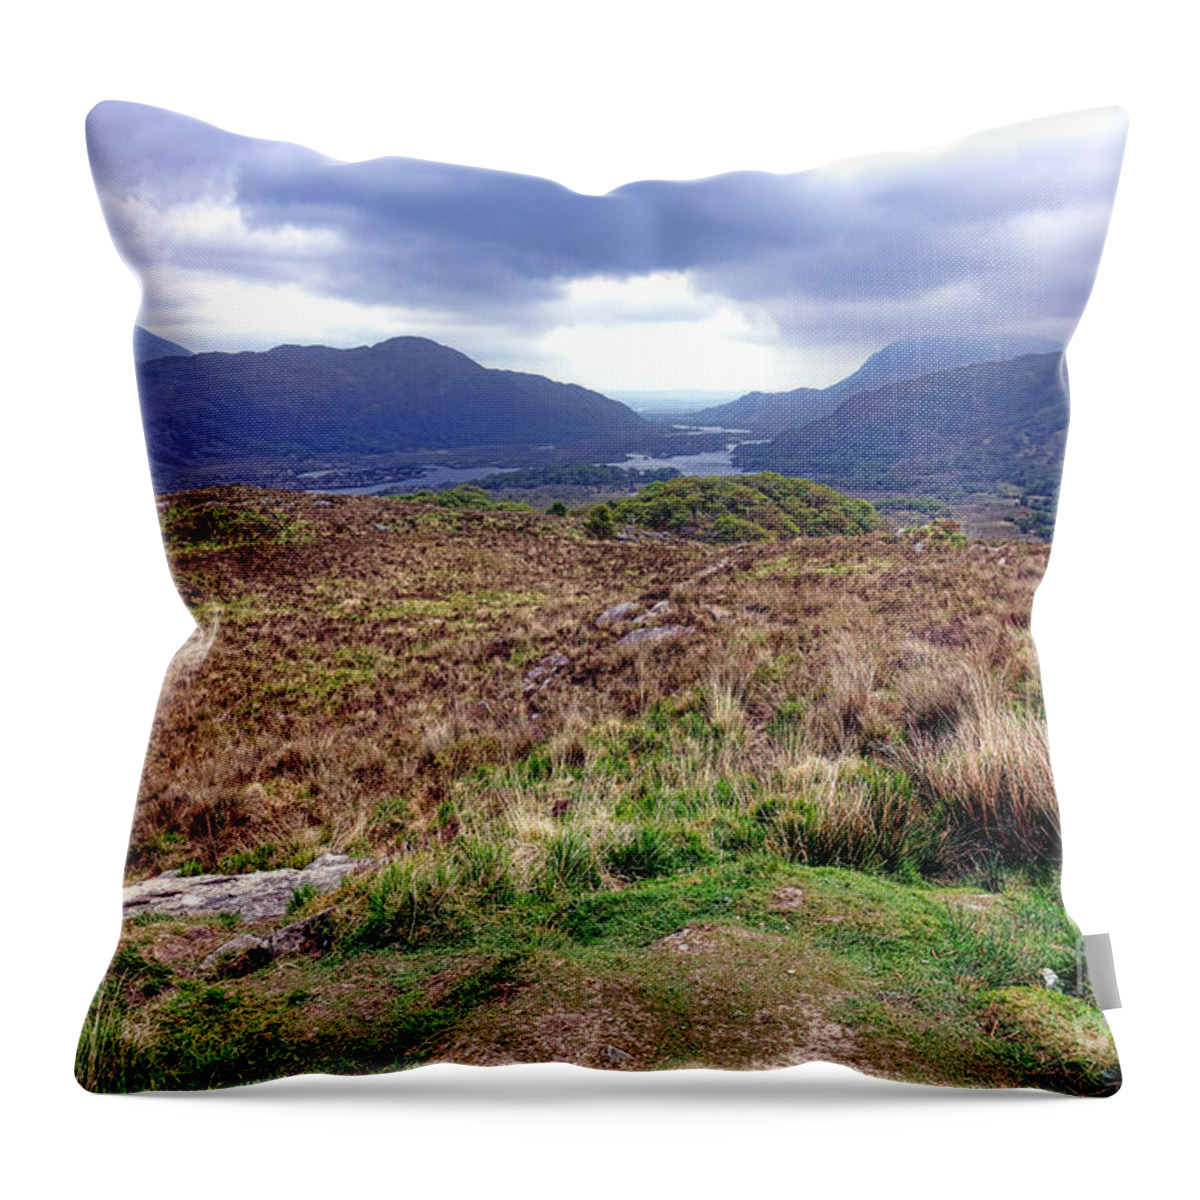 Iveragh Throw Pillow featuring the photograph Iveragh Peninsula Landscape by Olivier Le Queinec